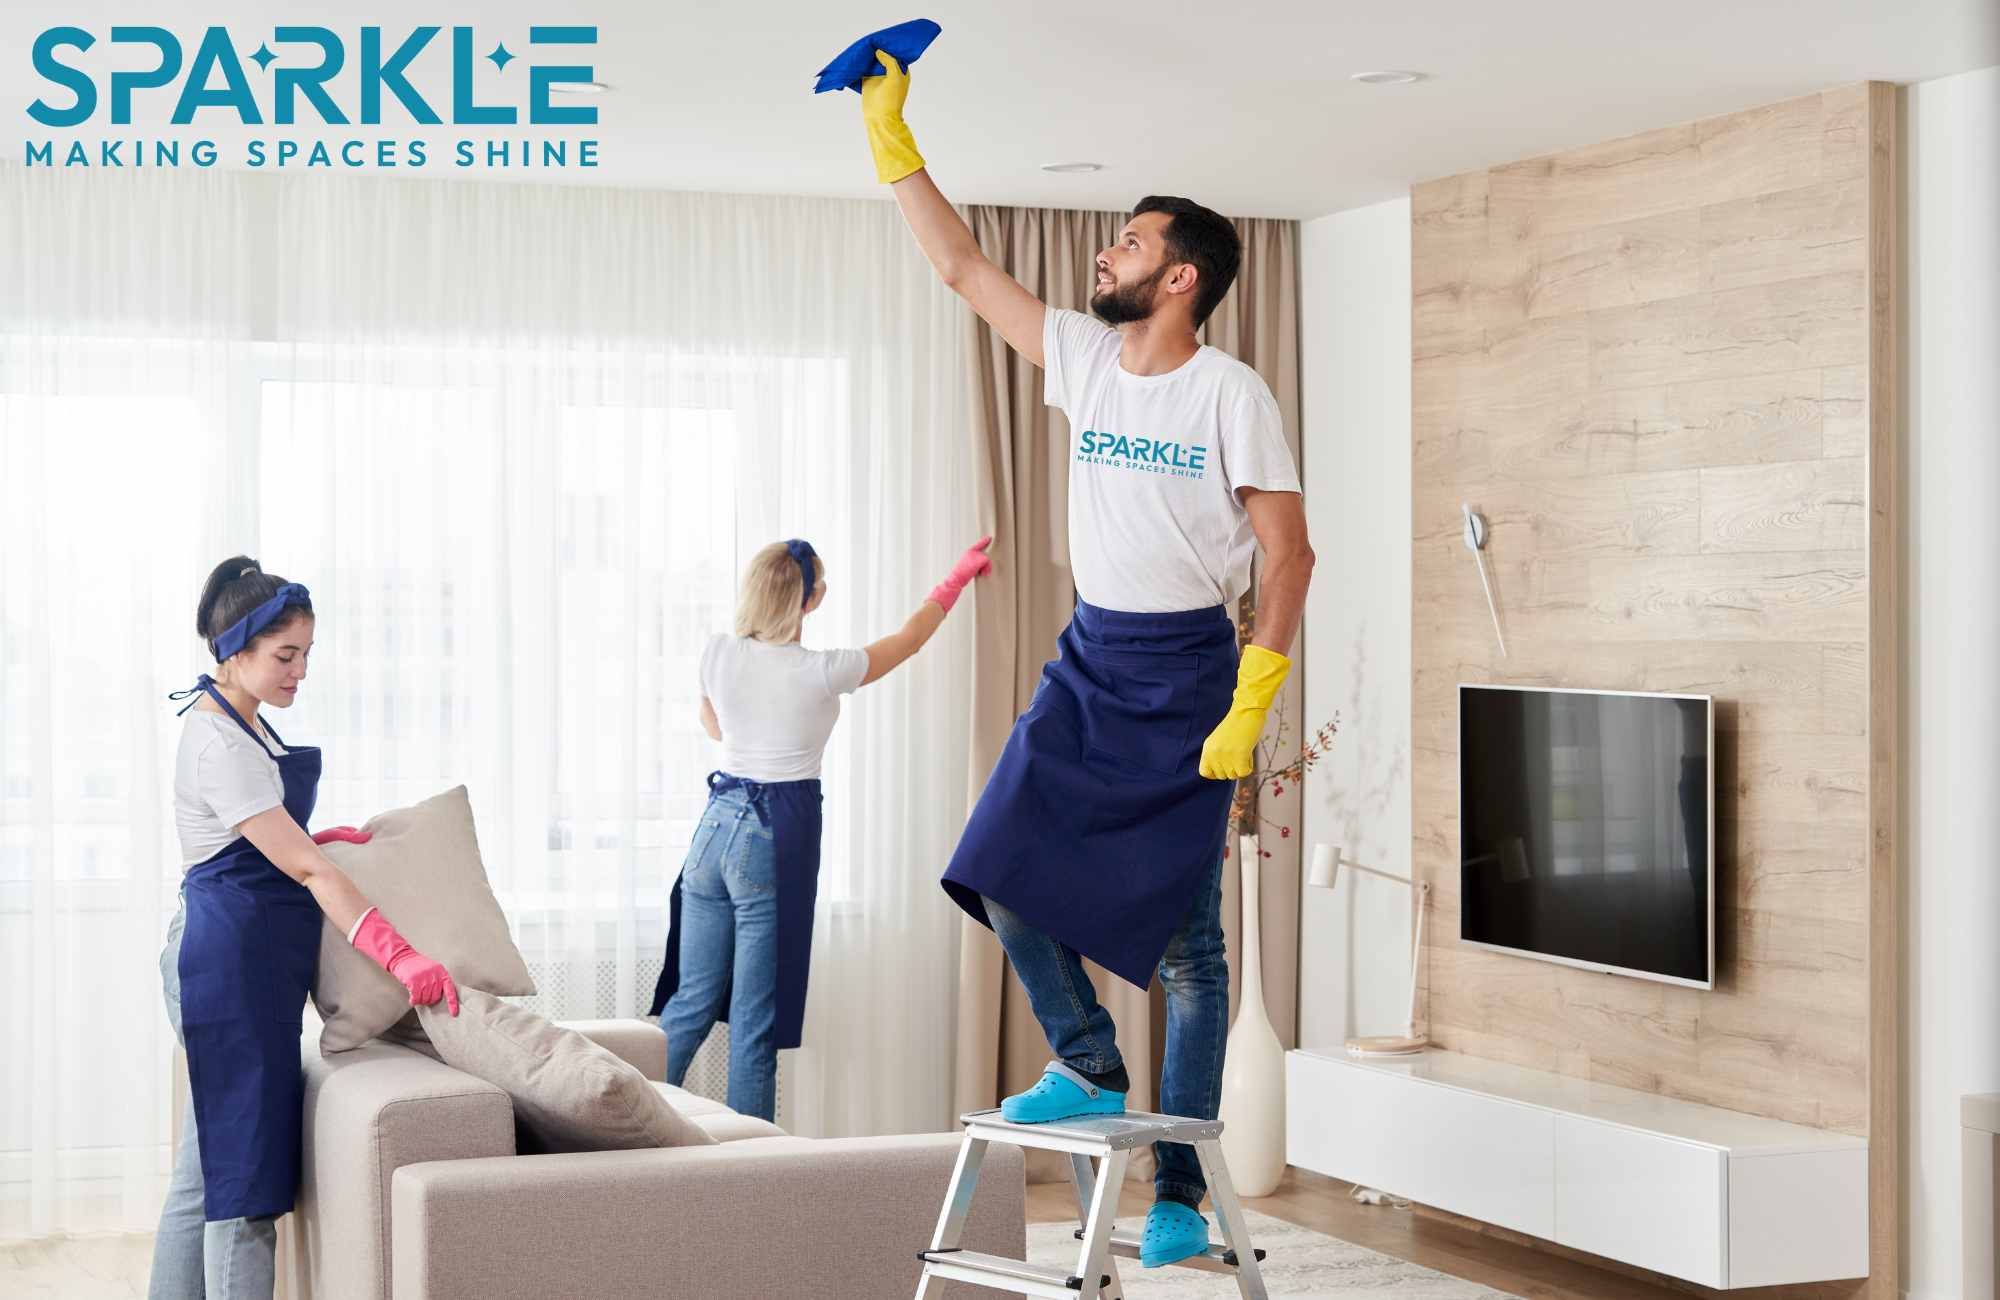 {alt=Blog How Professional Cleaning Services Can Reduce Time and Stress (1080 x 1080 px) (2000 x 1300 px), height=1300, max_height=1300, max_width=2000, src=https://24123253.fs1.hubspotusercontent-na1.net/hubfs/24123253/Blog%20How%20Professional%20Cleaning%20Services%20Can%20Reduce%20Time%20and%20Stress%20(1080%20x%201080%20px)%20(2000%20x%201300%20px).png, width=2000, size_type=auto, loading=lazy}